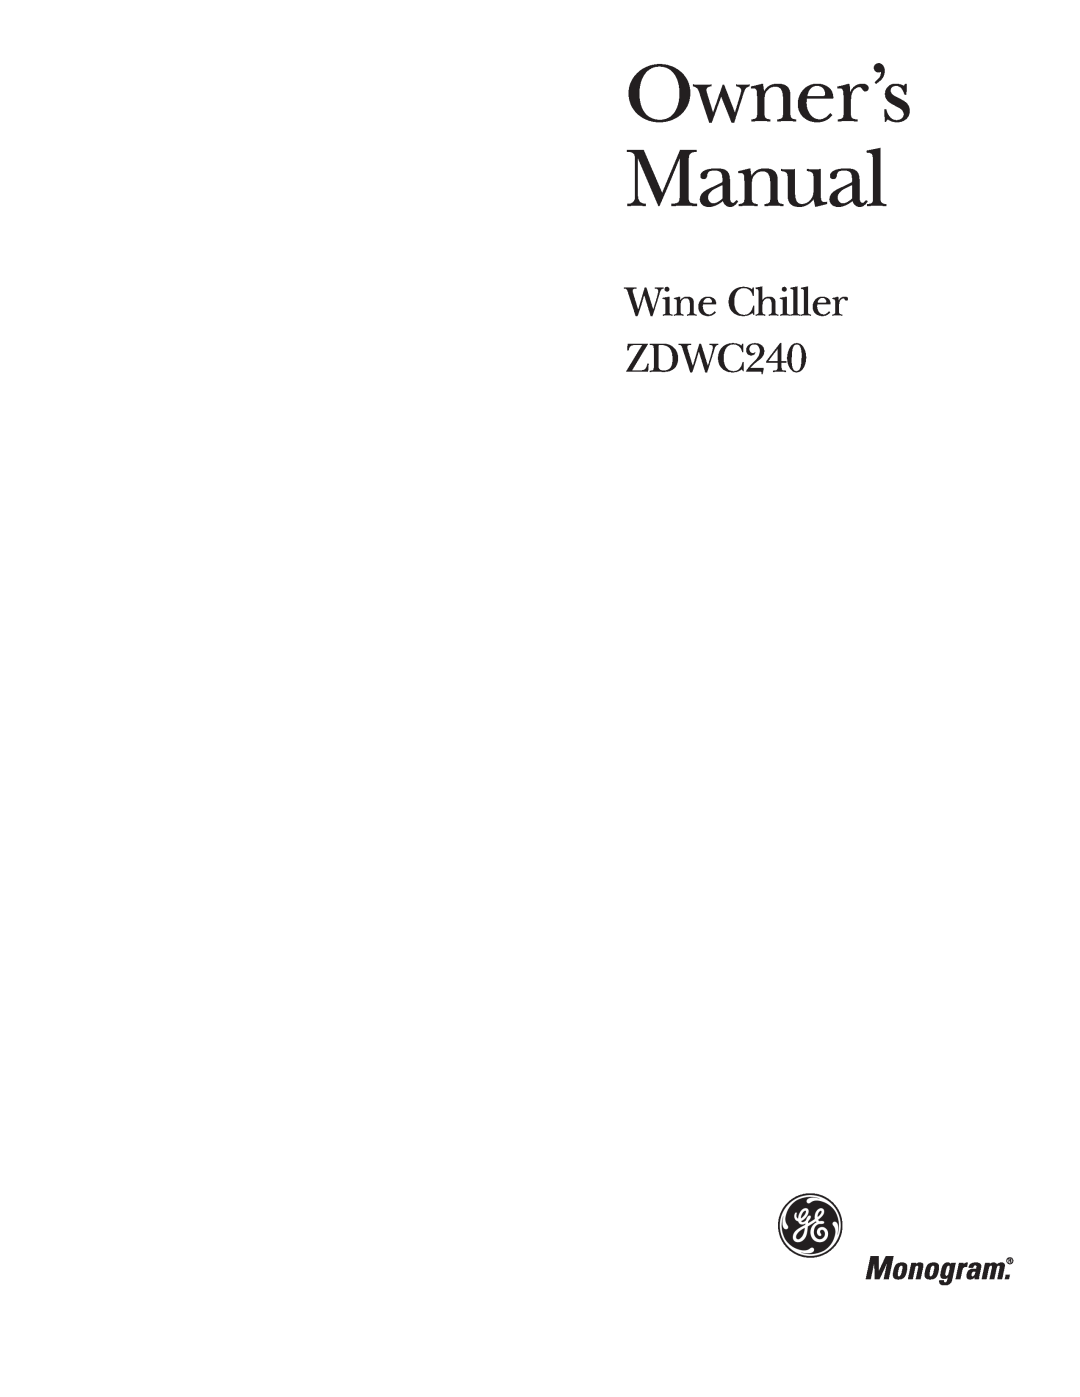 GE owner manual Wine Chiller ZDWC240 